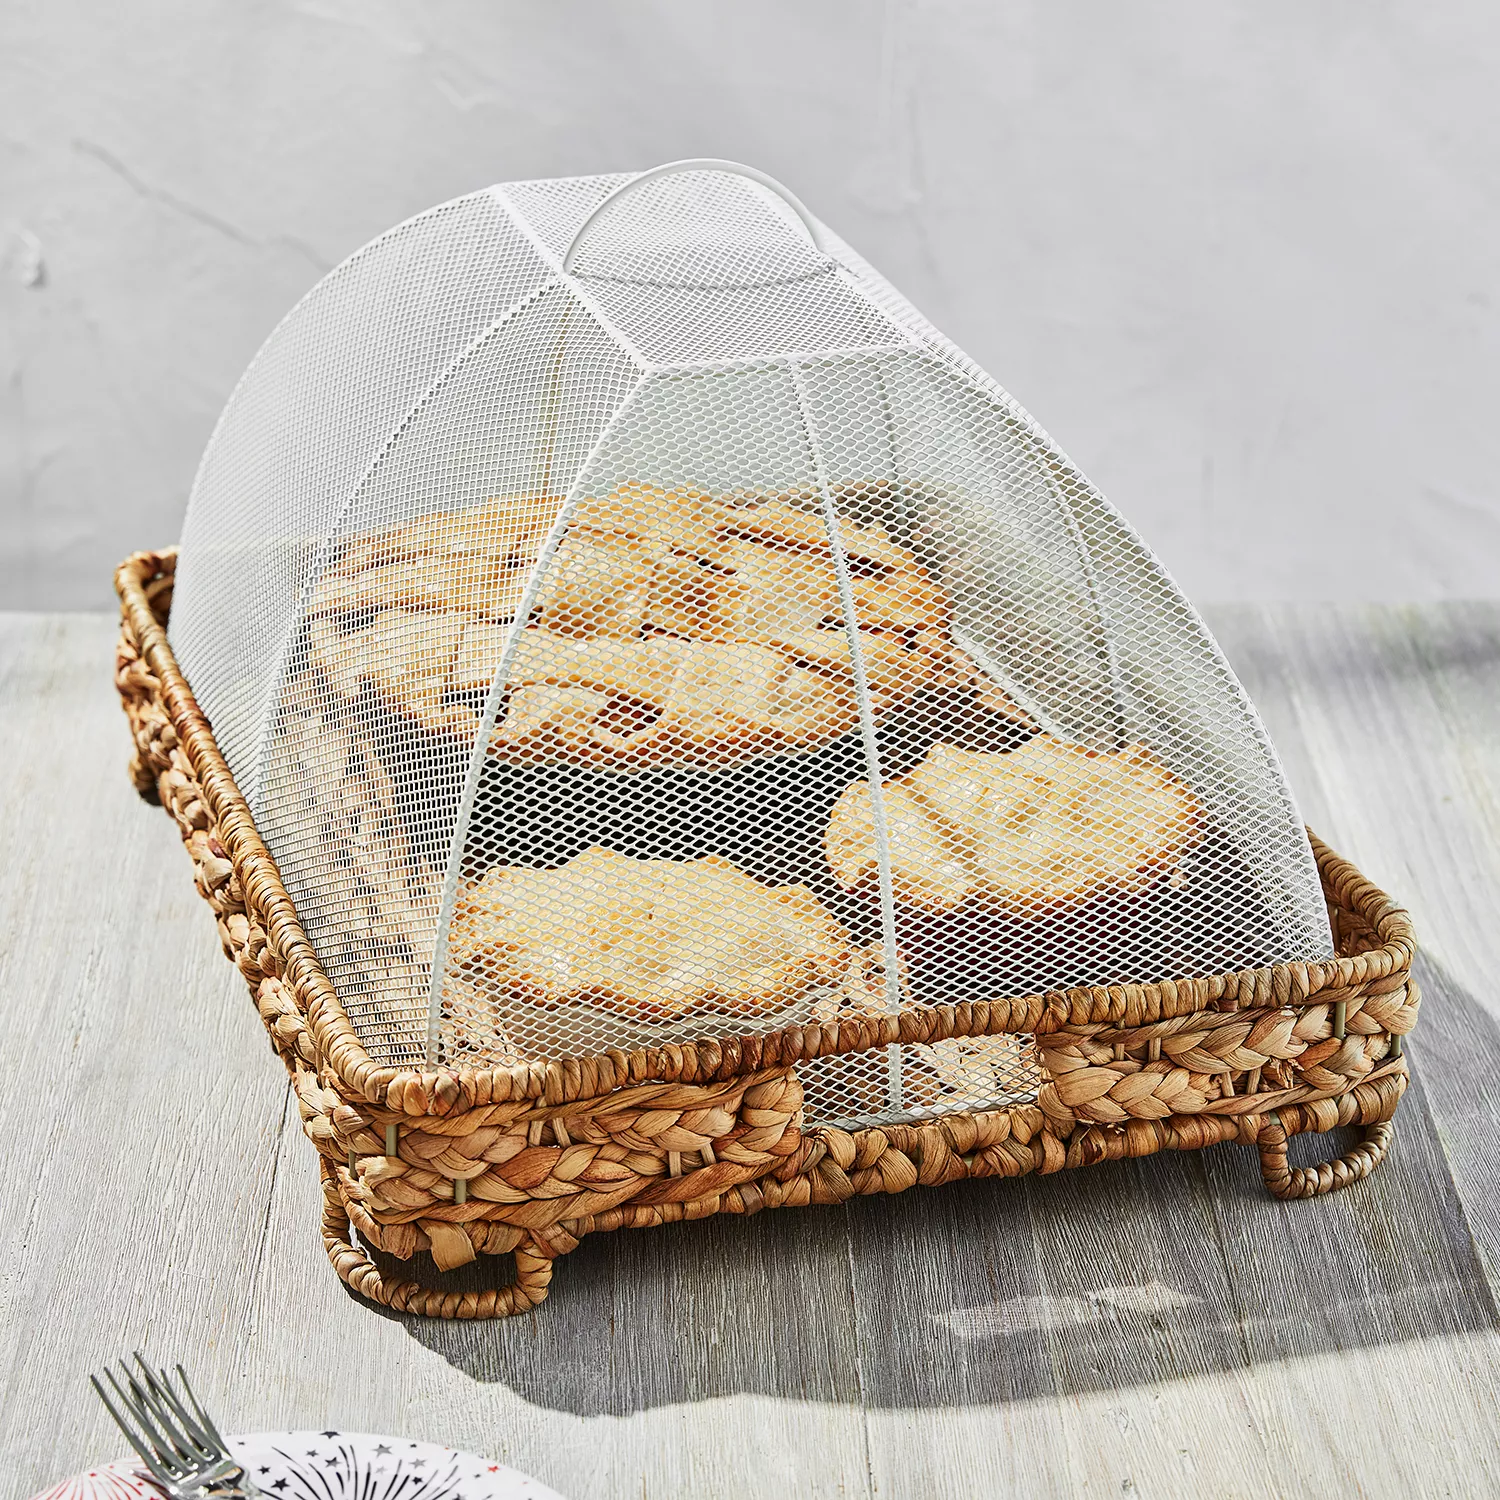 Sur La Table Water Hyacinth Food Dome and Tray